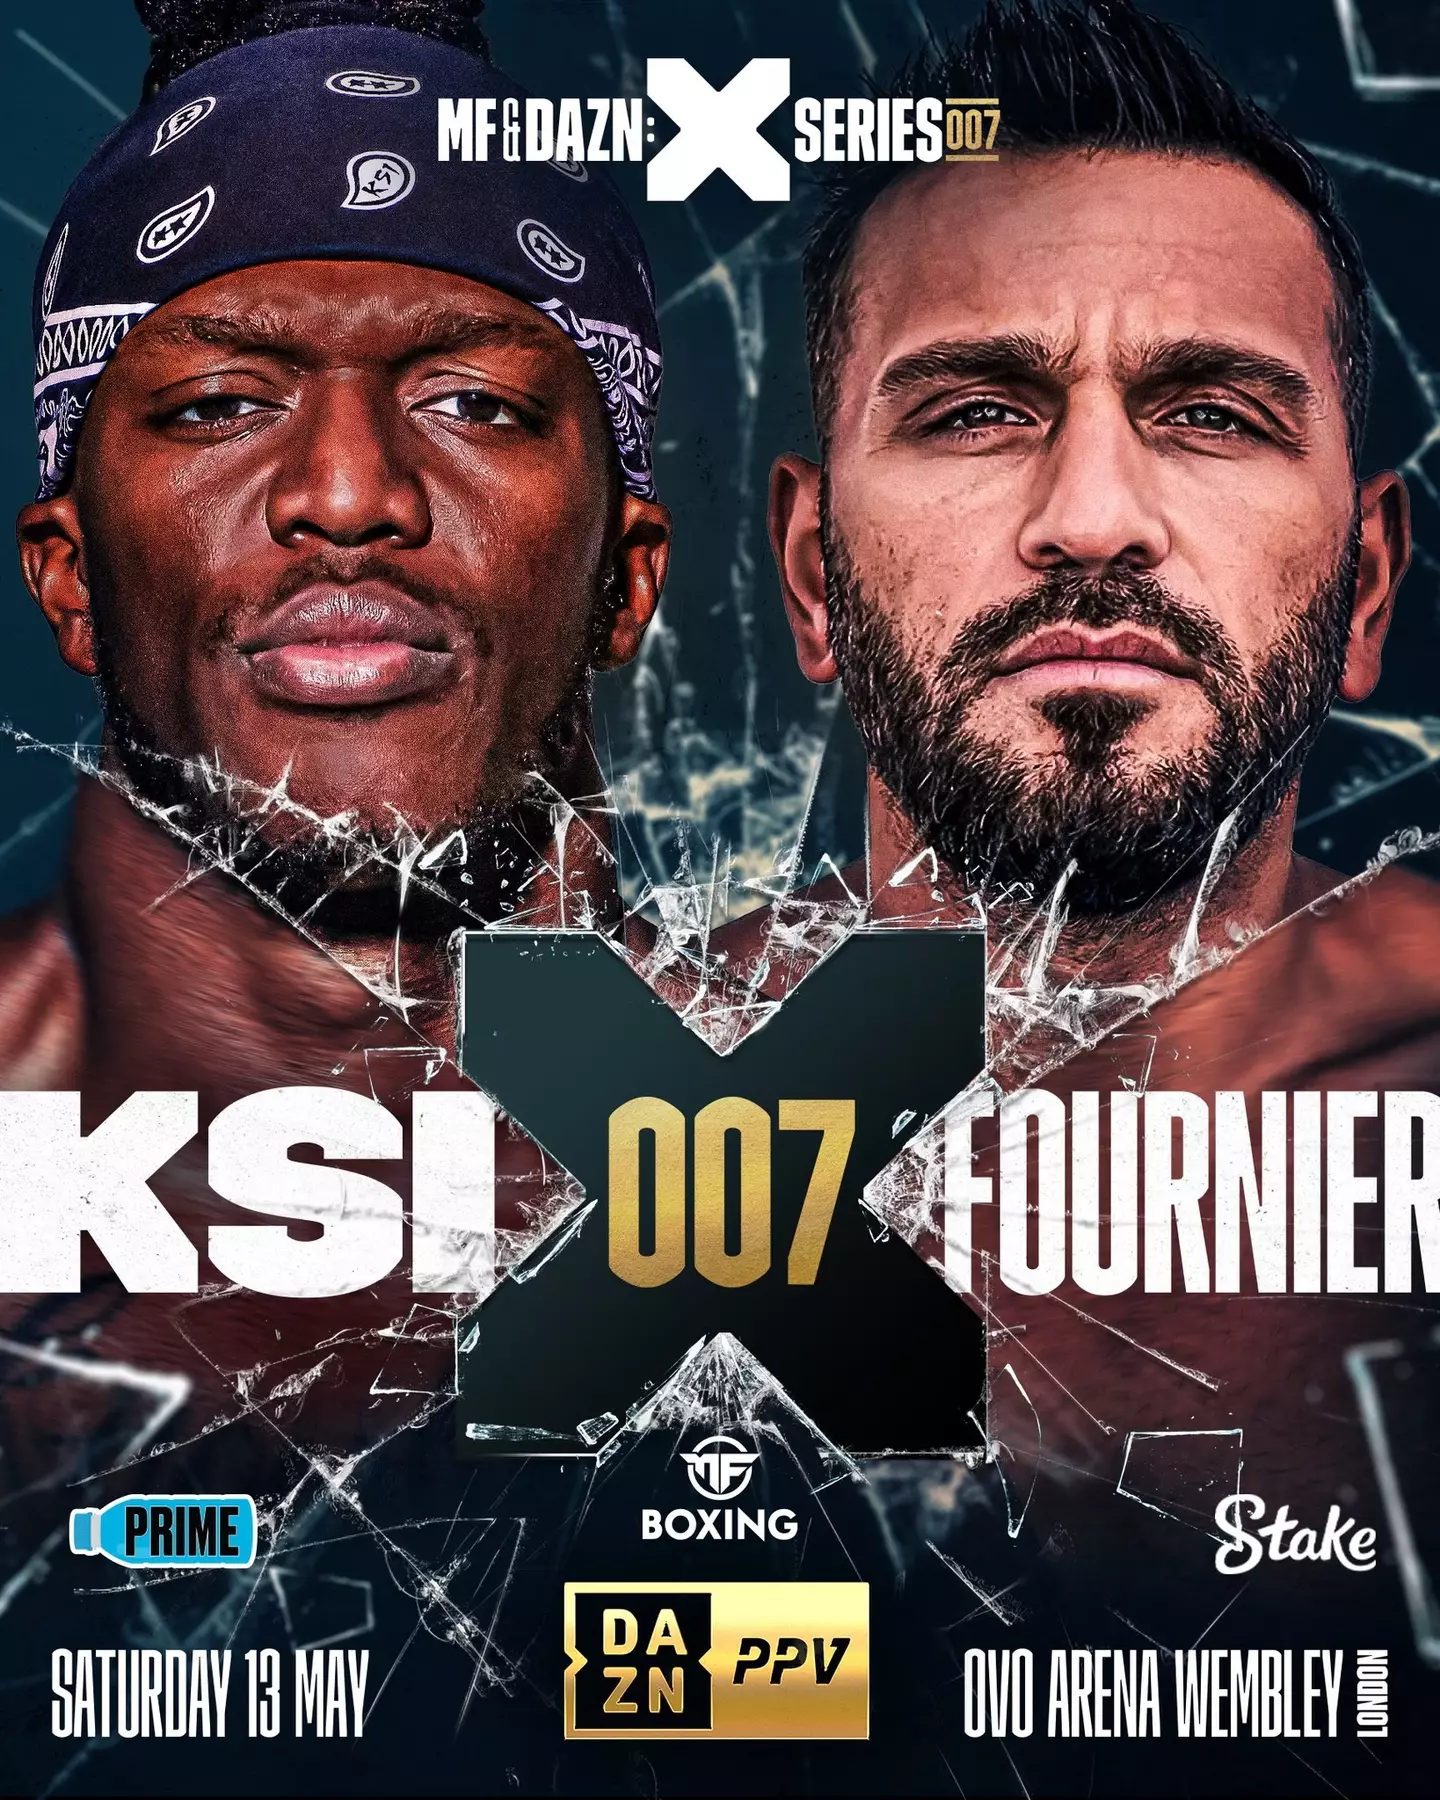 Fournier will be the first boxer KSI has faced.